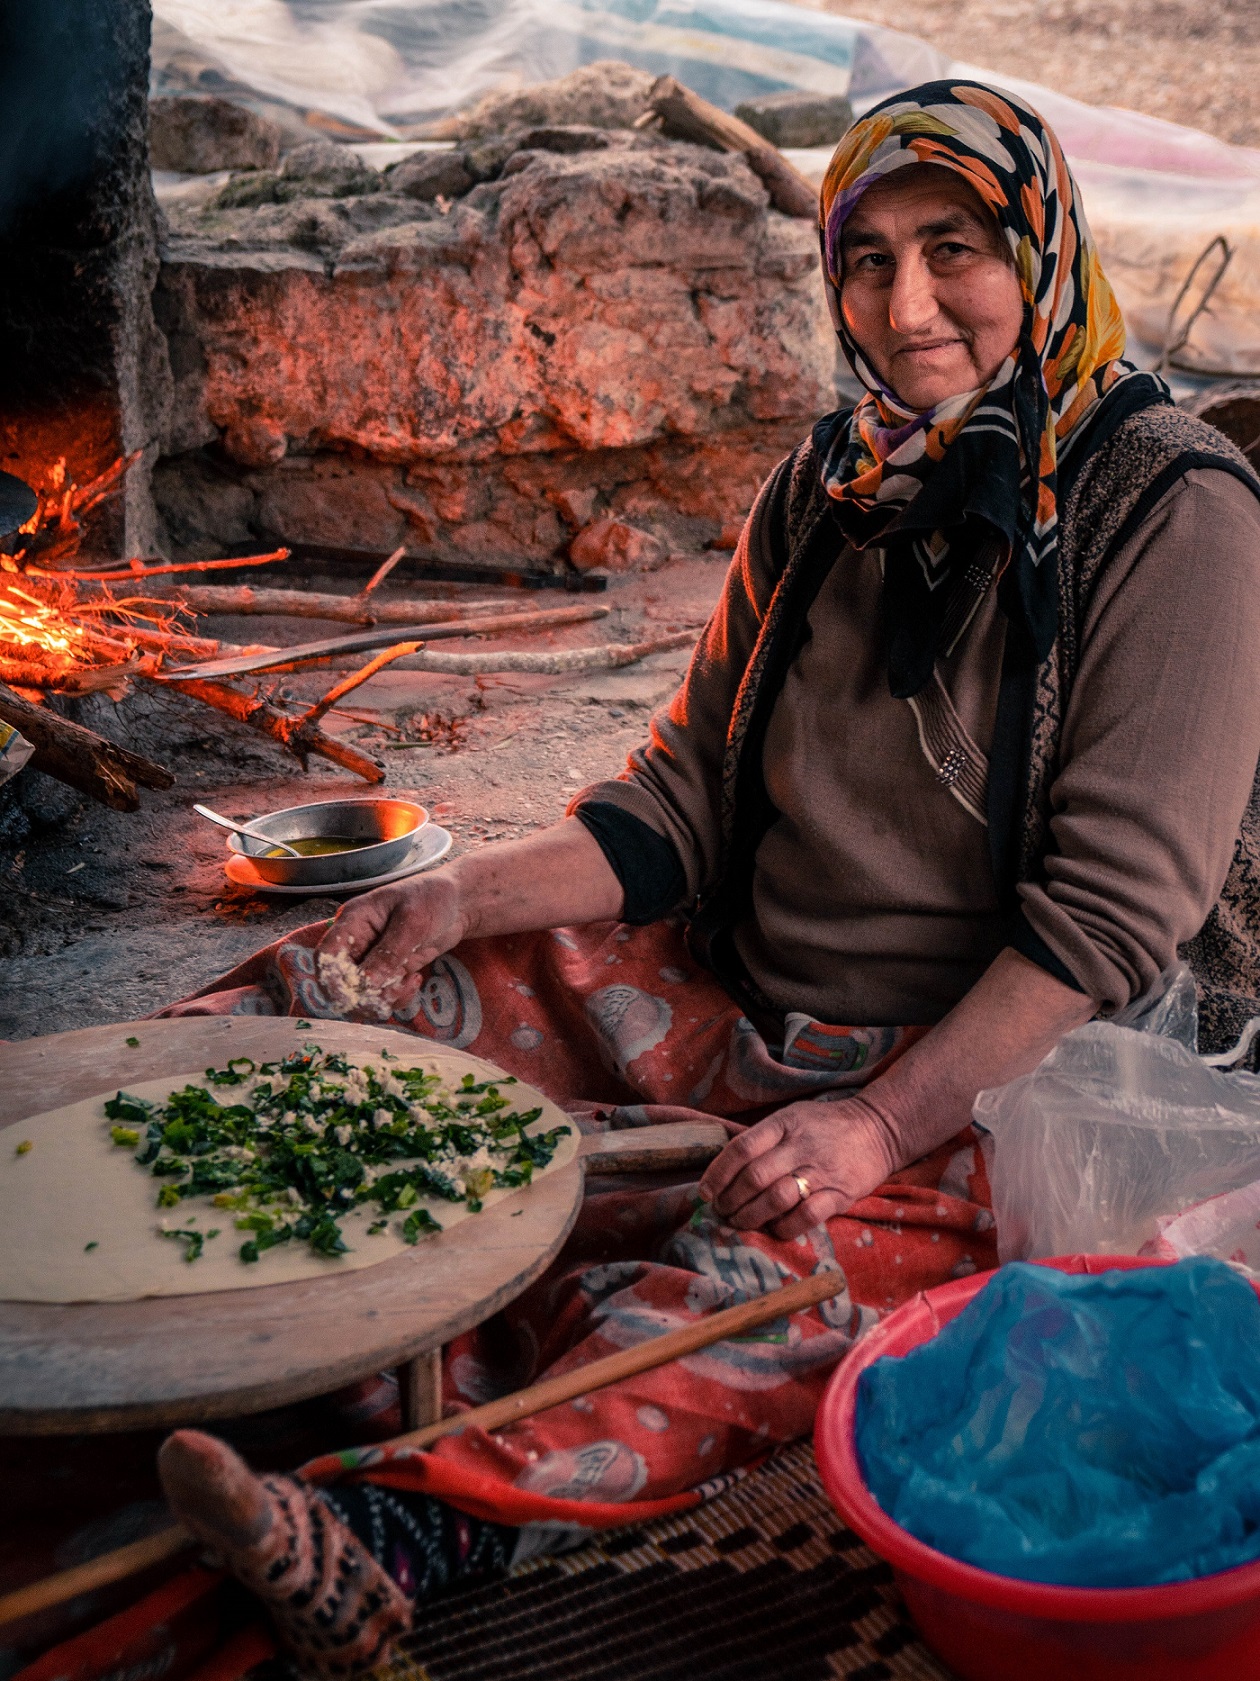 As one moves towards the shores, trade, travel, and tourism have brought exposure, and wealth, to the communities. This influx of resources and ideas have laid the foundations of new ideas, cultures, and the beginnings of leftism and liberalism. Woman vendor near Antalya.